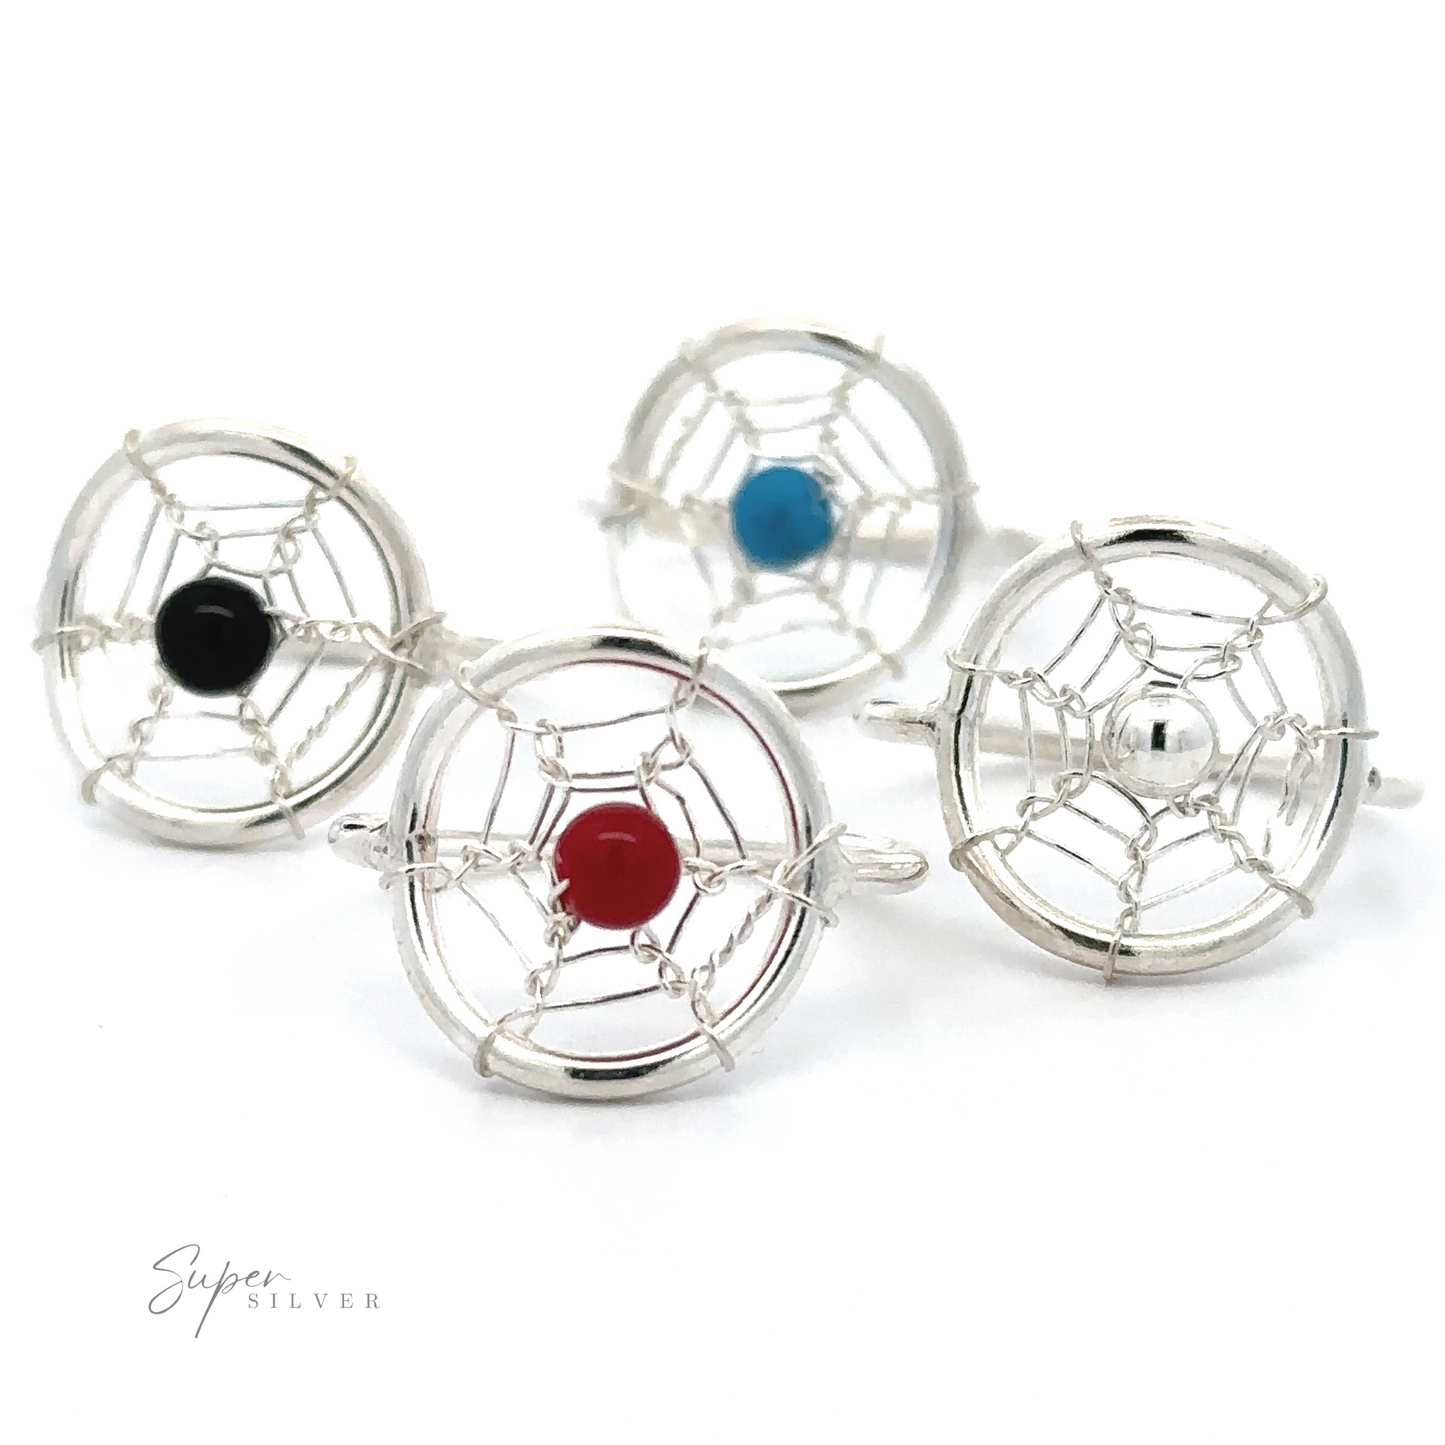 Four Wire Dreamcatcher Rings with Beads displayed on a light background.